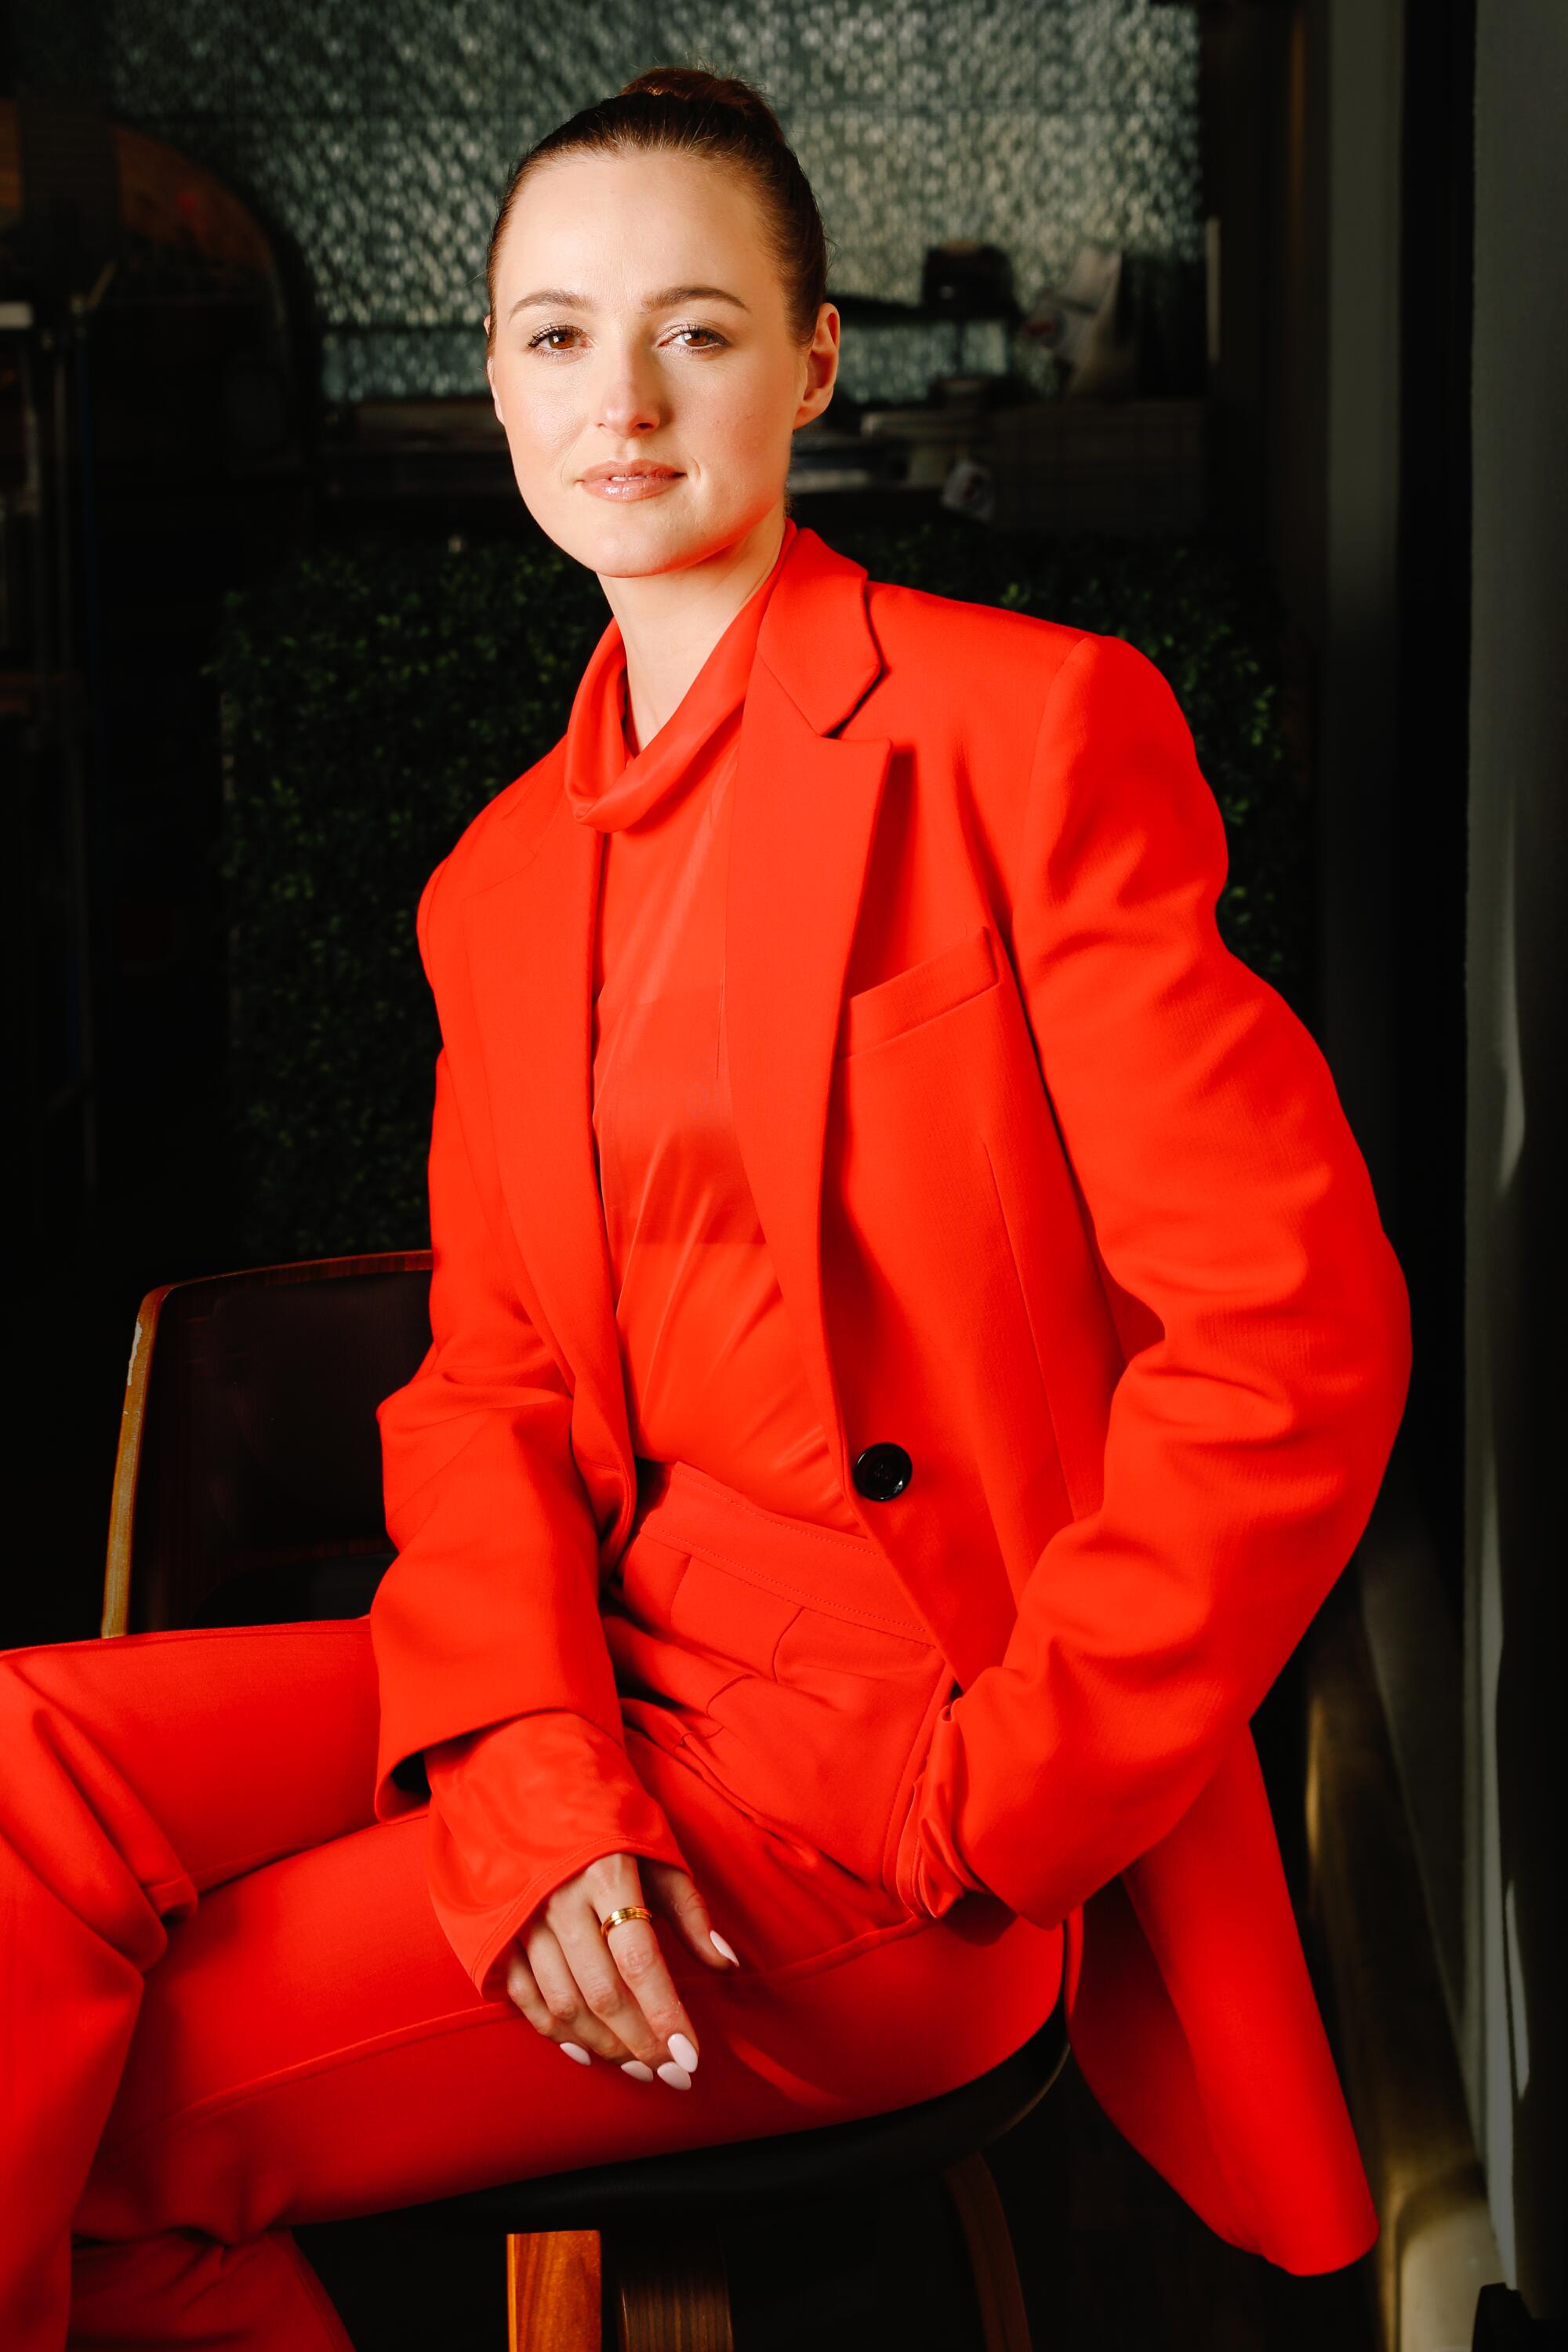 A seated woman poses in a red suit.